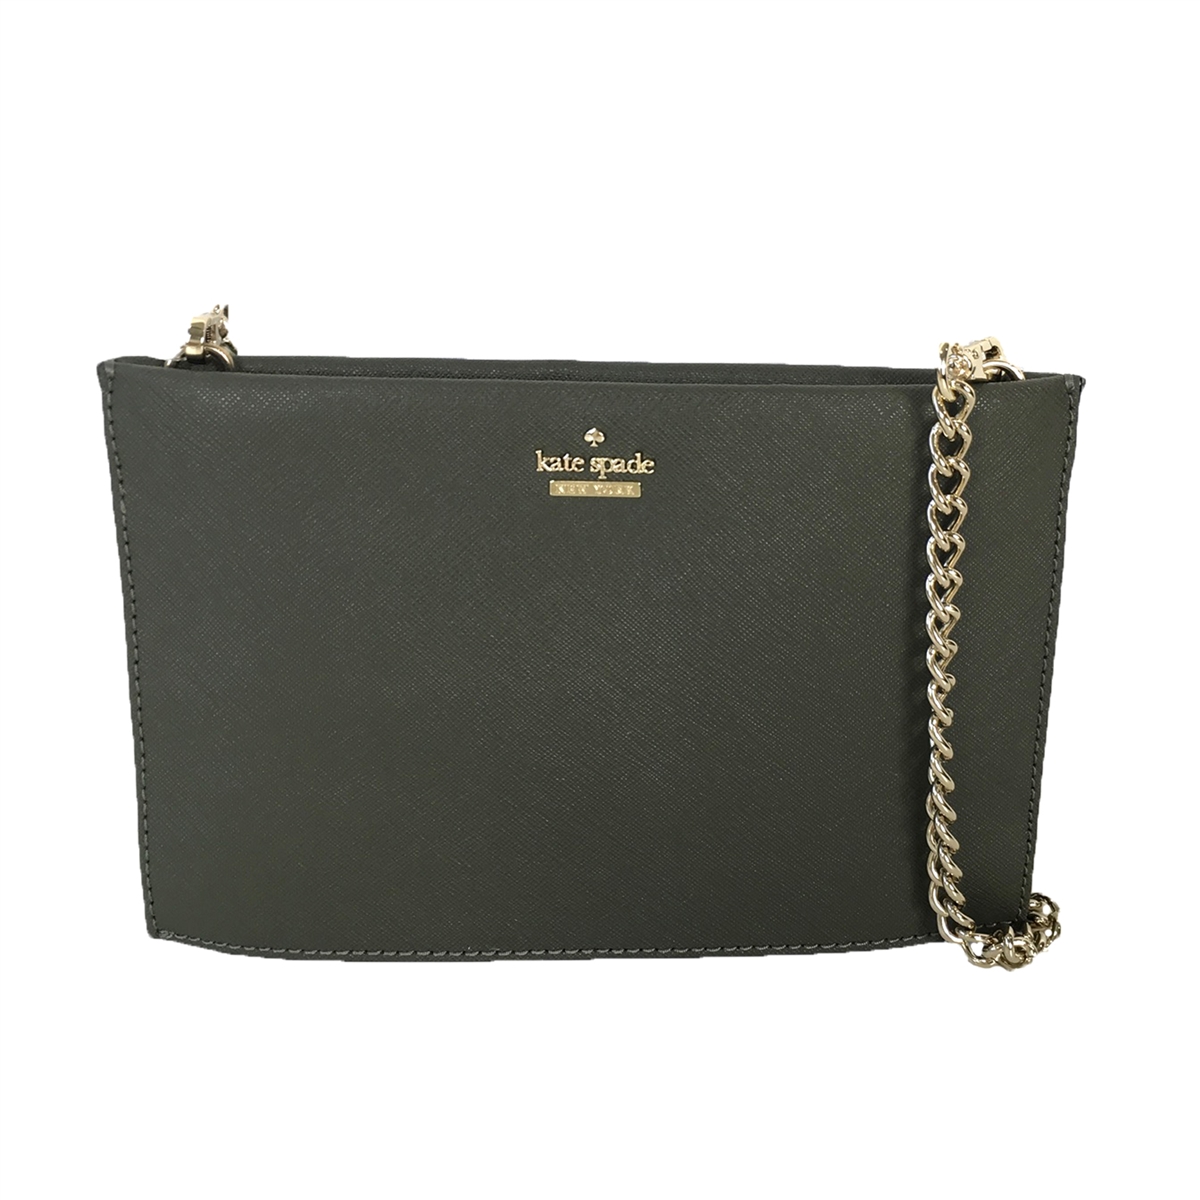 Kate Spade New York Cameron Street Chain 3 in 1 Clutch Shoulder